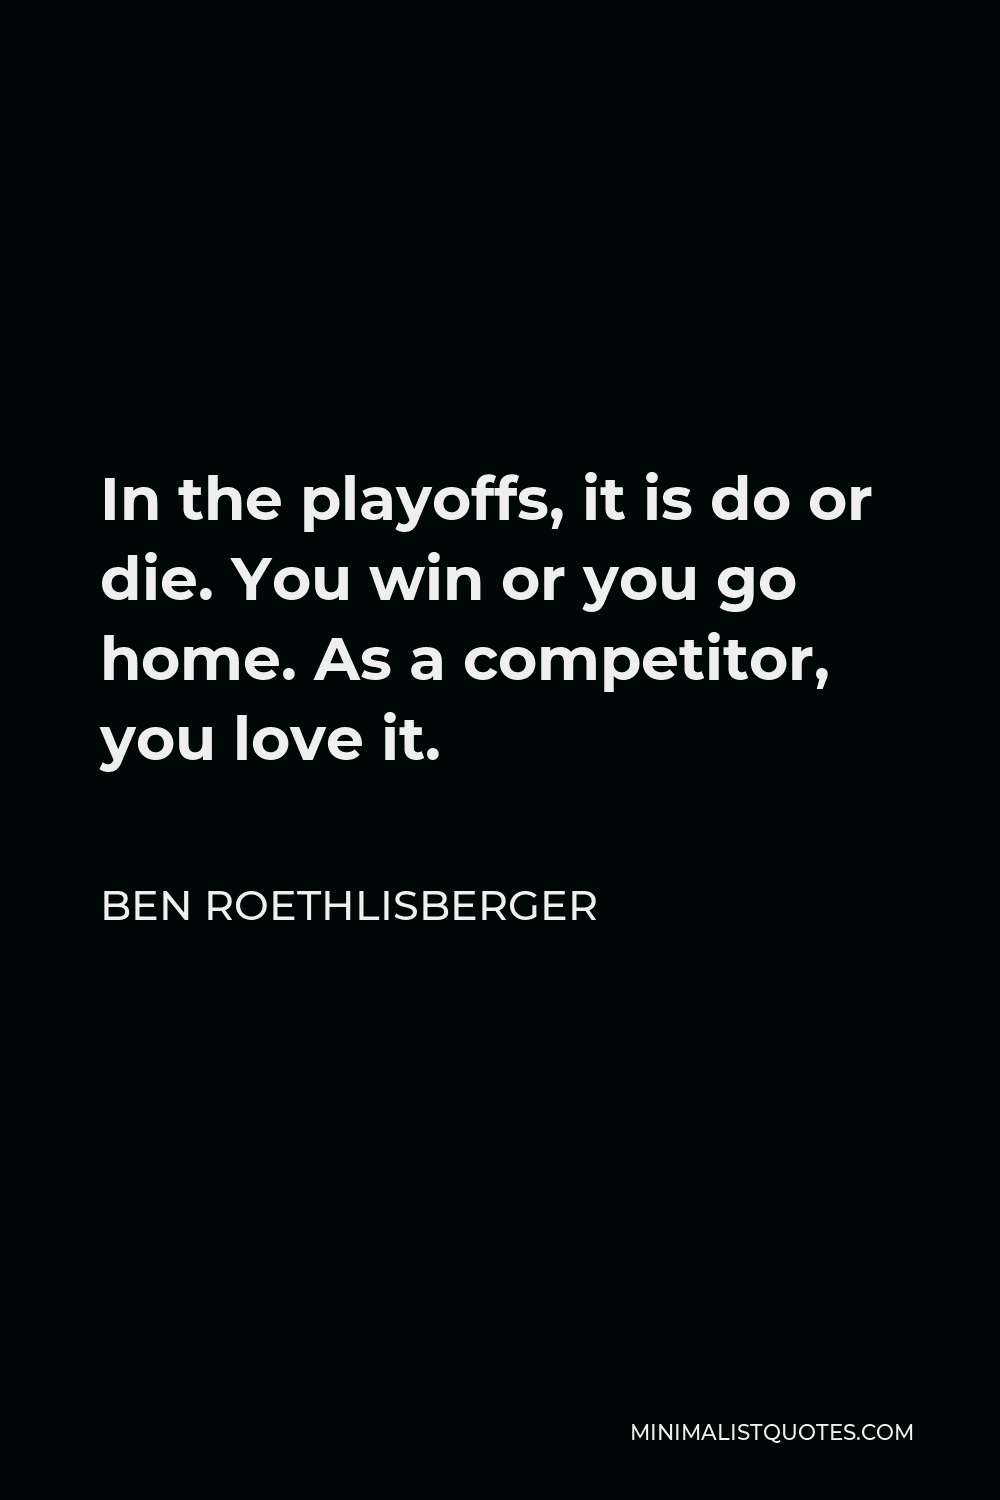 Ben Roethlisberger Quote - In the playoffs, it is do or die. You win or you go home. As a competitor, you love it.